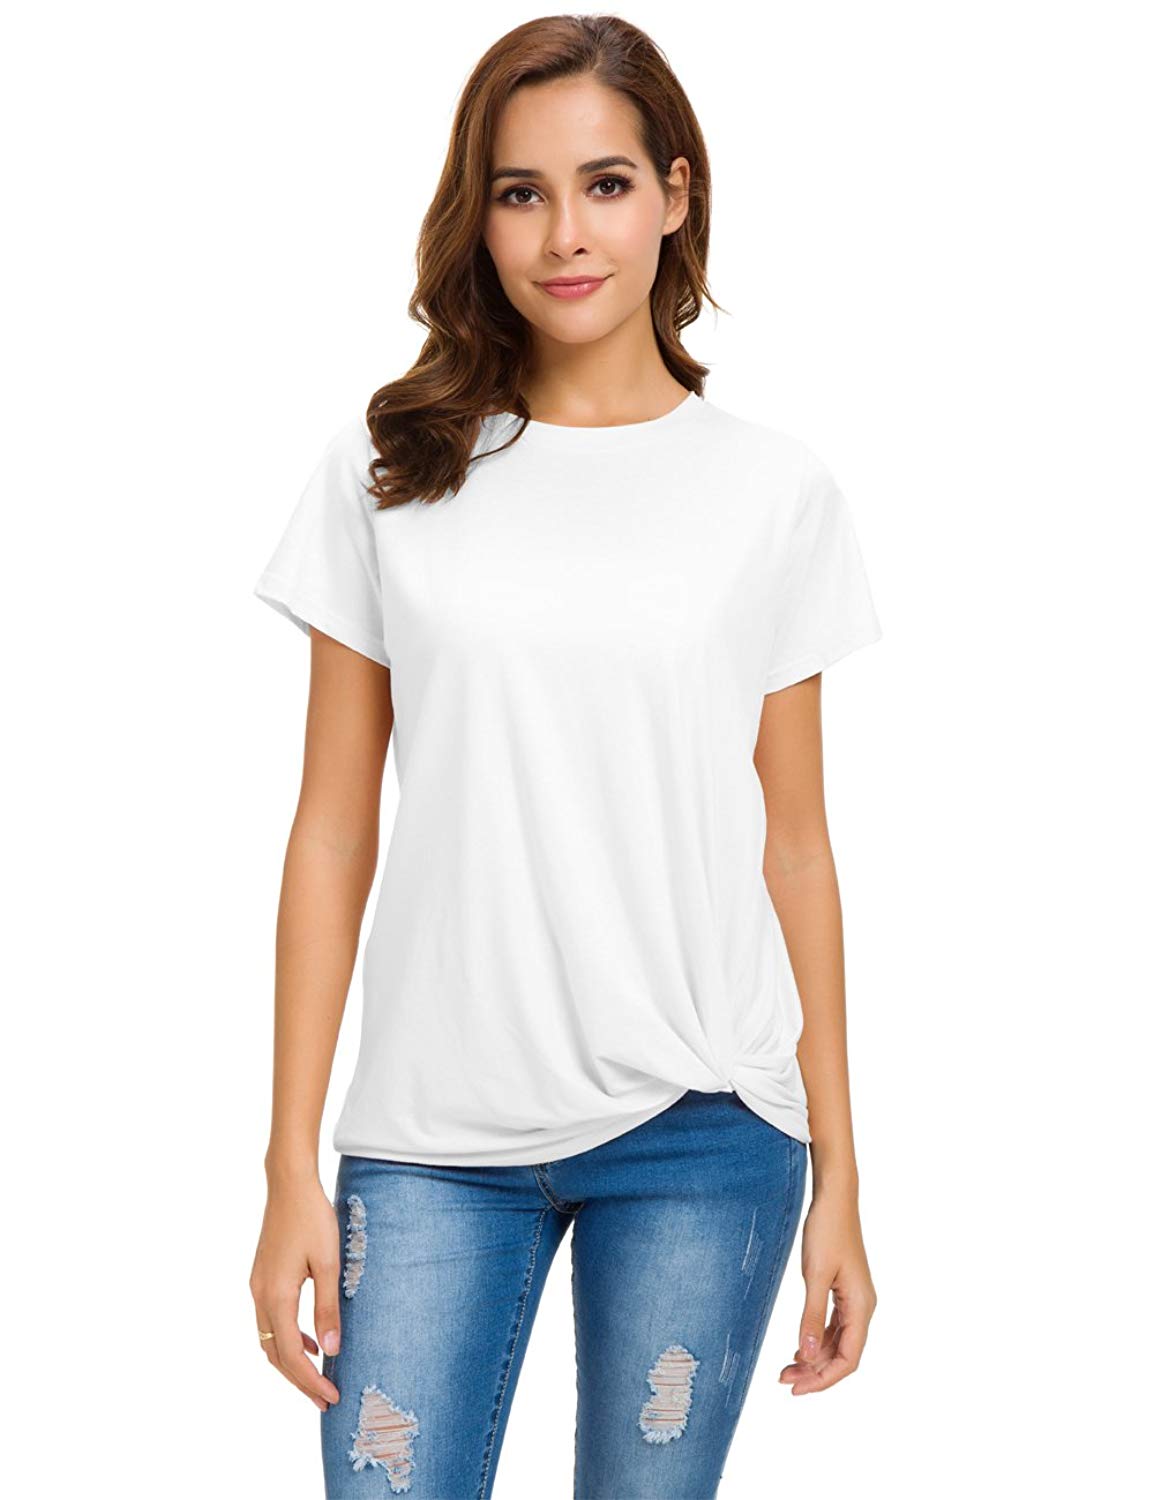 safety snatch Pith Rated: The 21 Best White T-Shirts on Amazon | Who What Wear